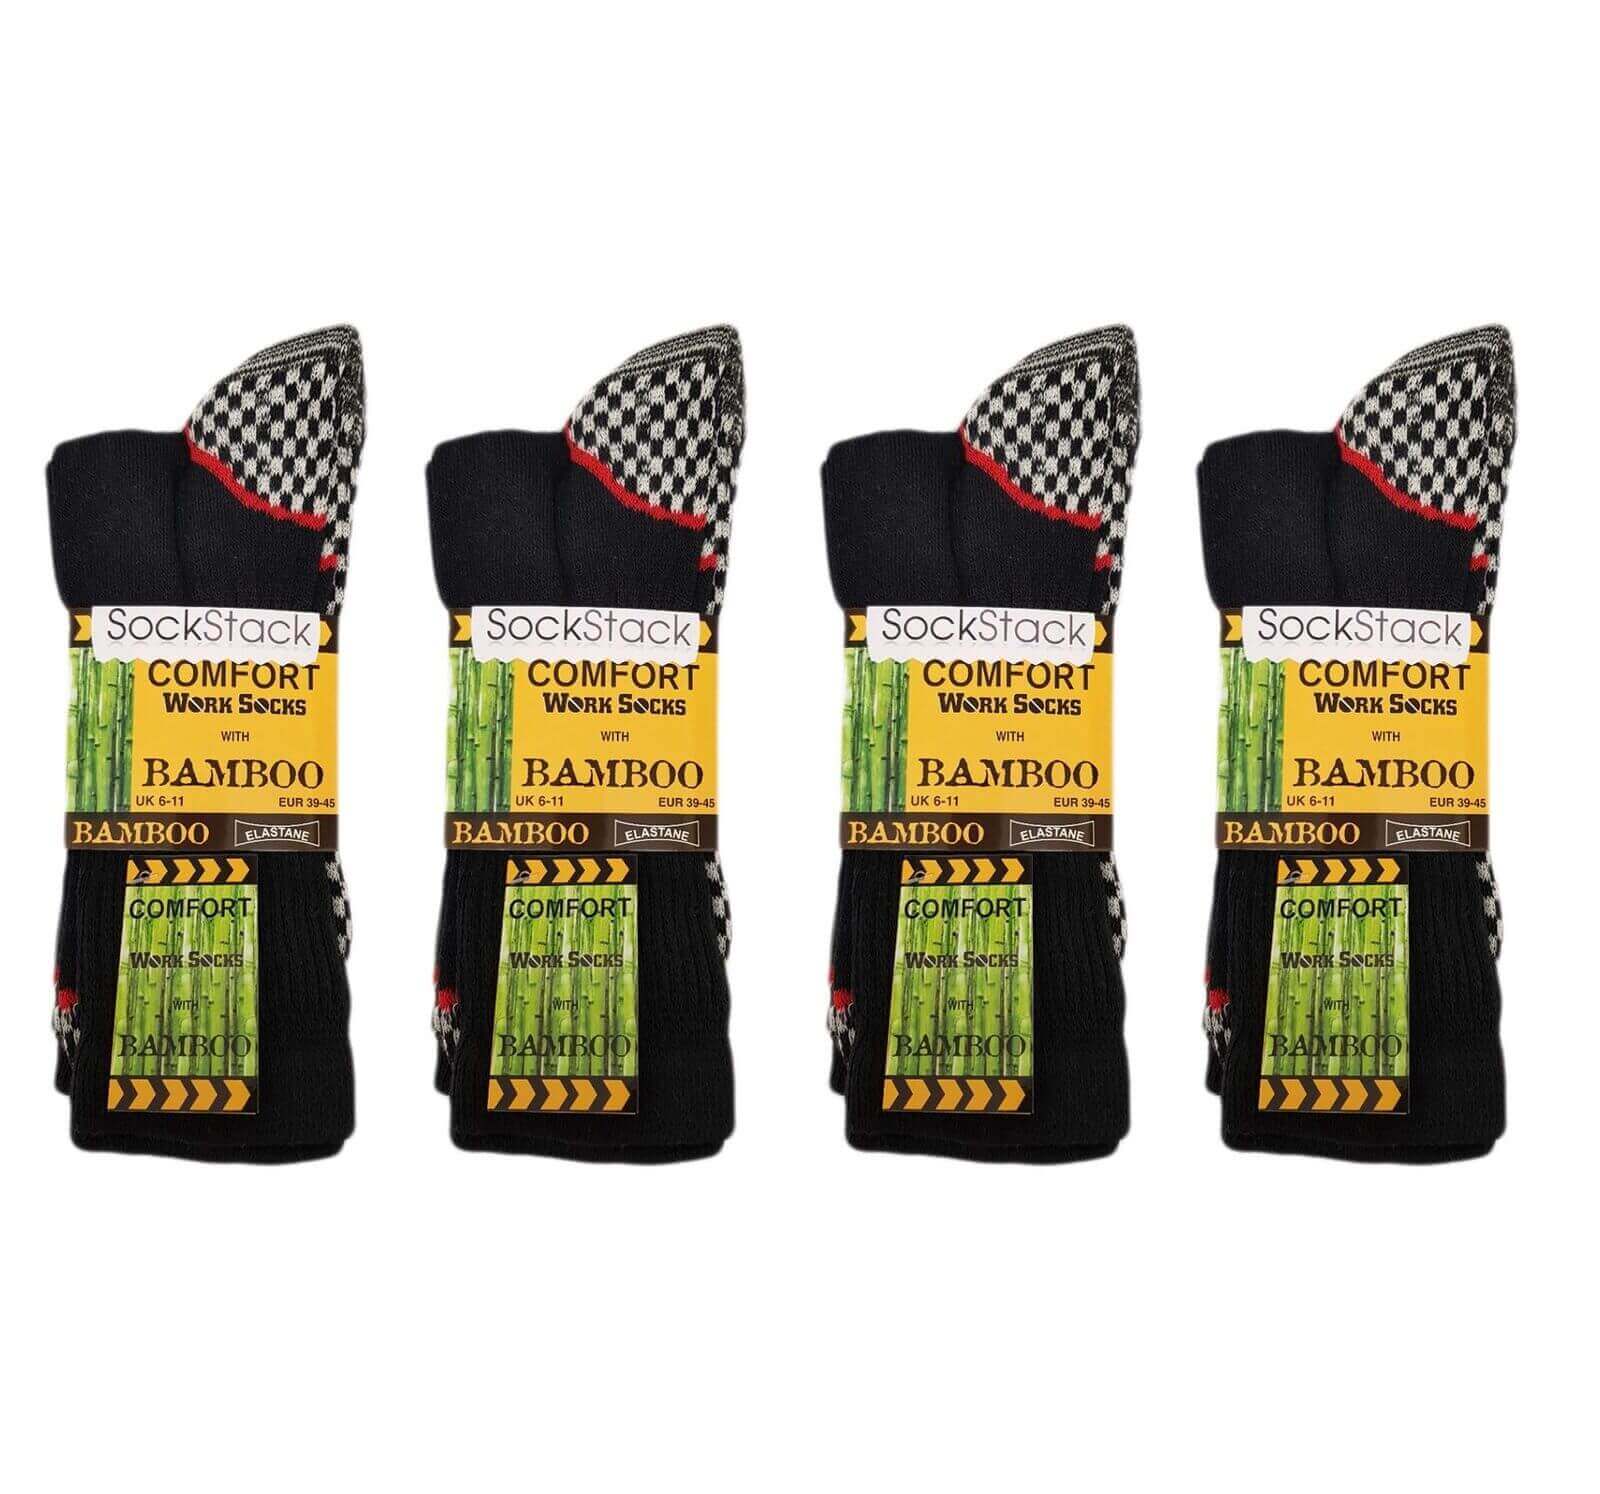 6 Pairs Of Men's Bamboo Work Socks, Ultimate Work Boot Socks. Buy now for £10.00. A Socks by Sock Stack. 6-11, anti bacterial, anti blister, assorted, bamboo, baselayer, black, boot, boys, comfortable, cosy, cotton, elastane, mens, mens socks, office, Out